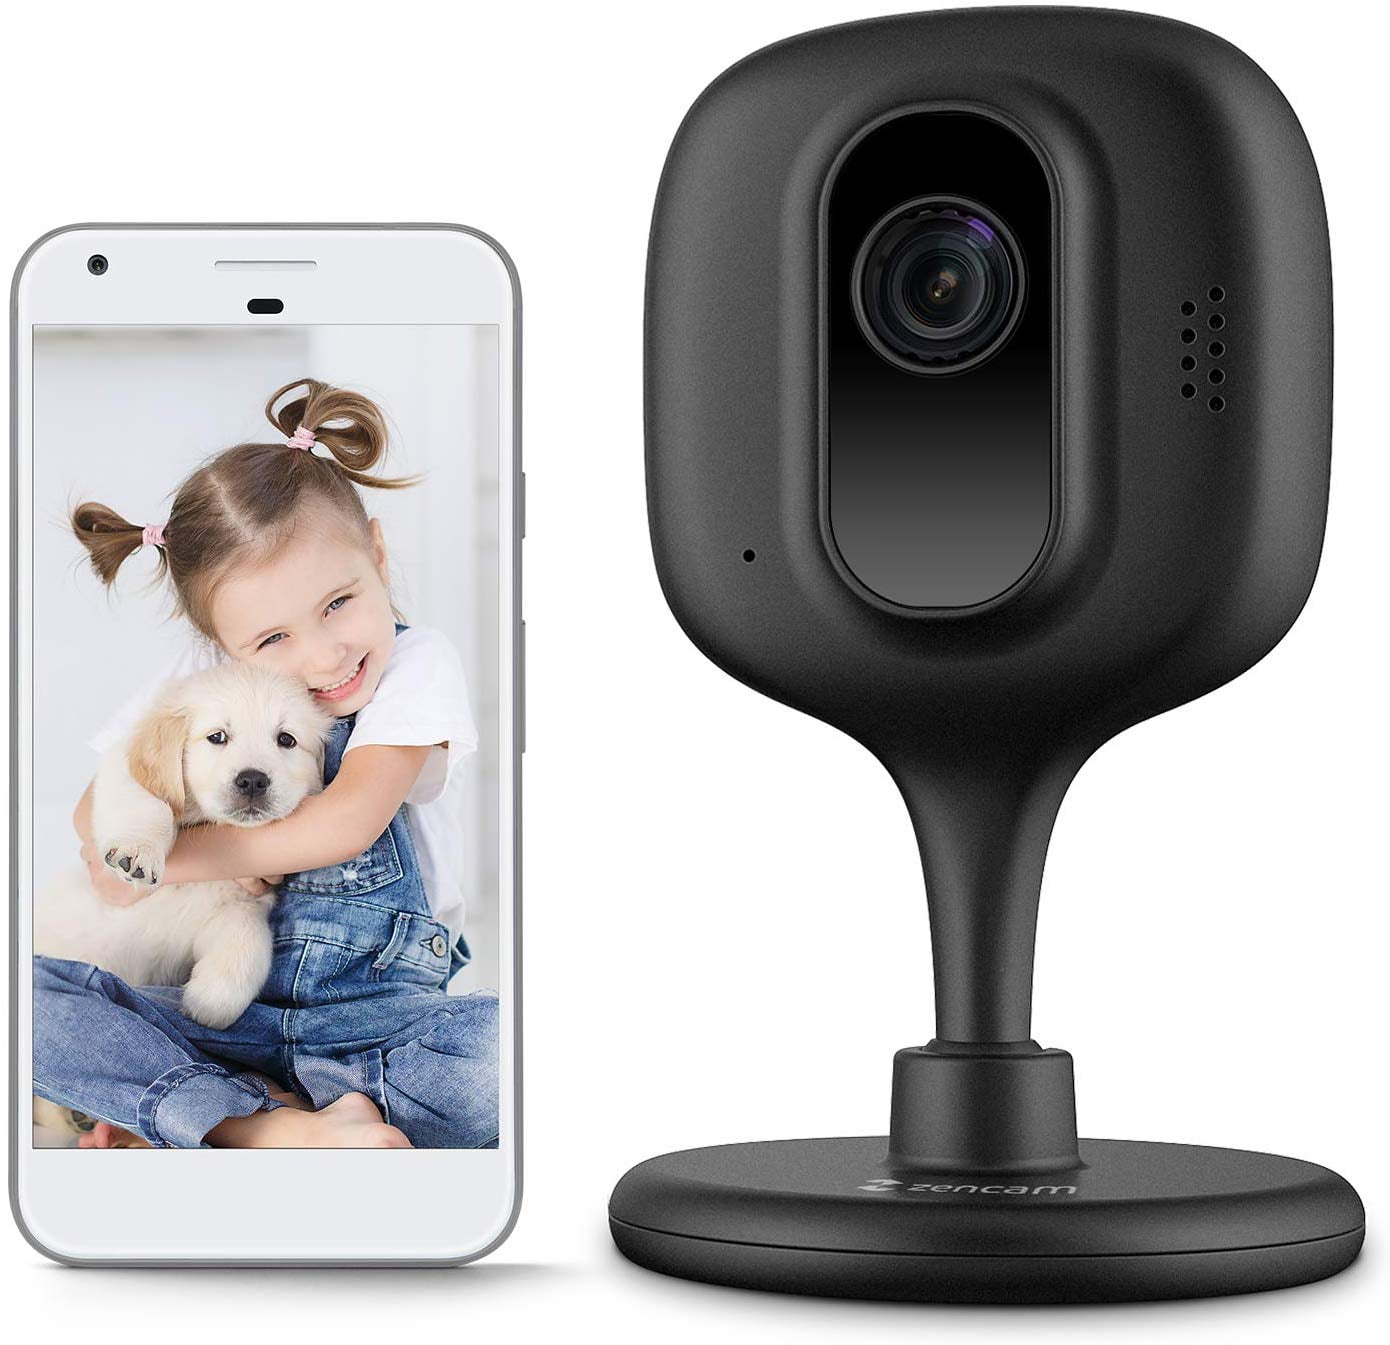 Pet Cam with MicroSD & Cloud Storage Night Vision for Home Indoor Wireless Security Camera IP Black Zencam 720P WiFi Camera E1B-V2 Updated Firmware, 2018 Two-Way Talk Baby Monitor Office 